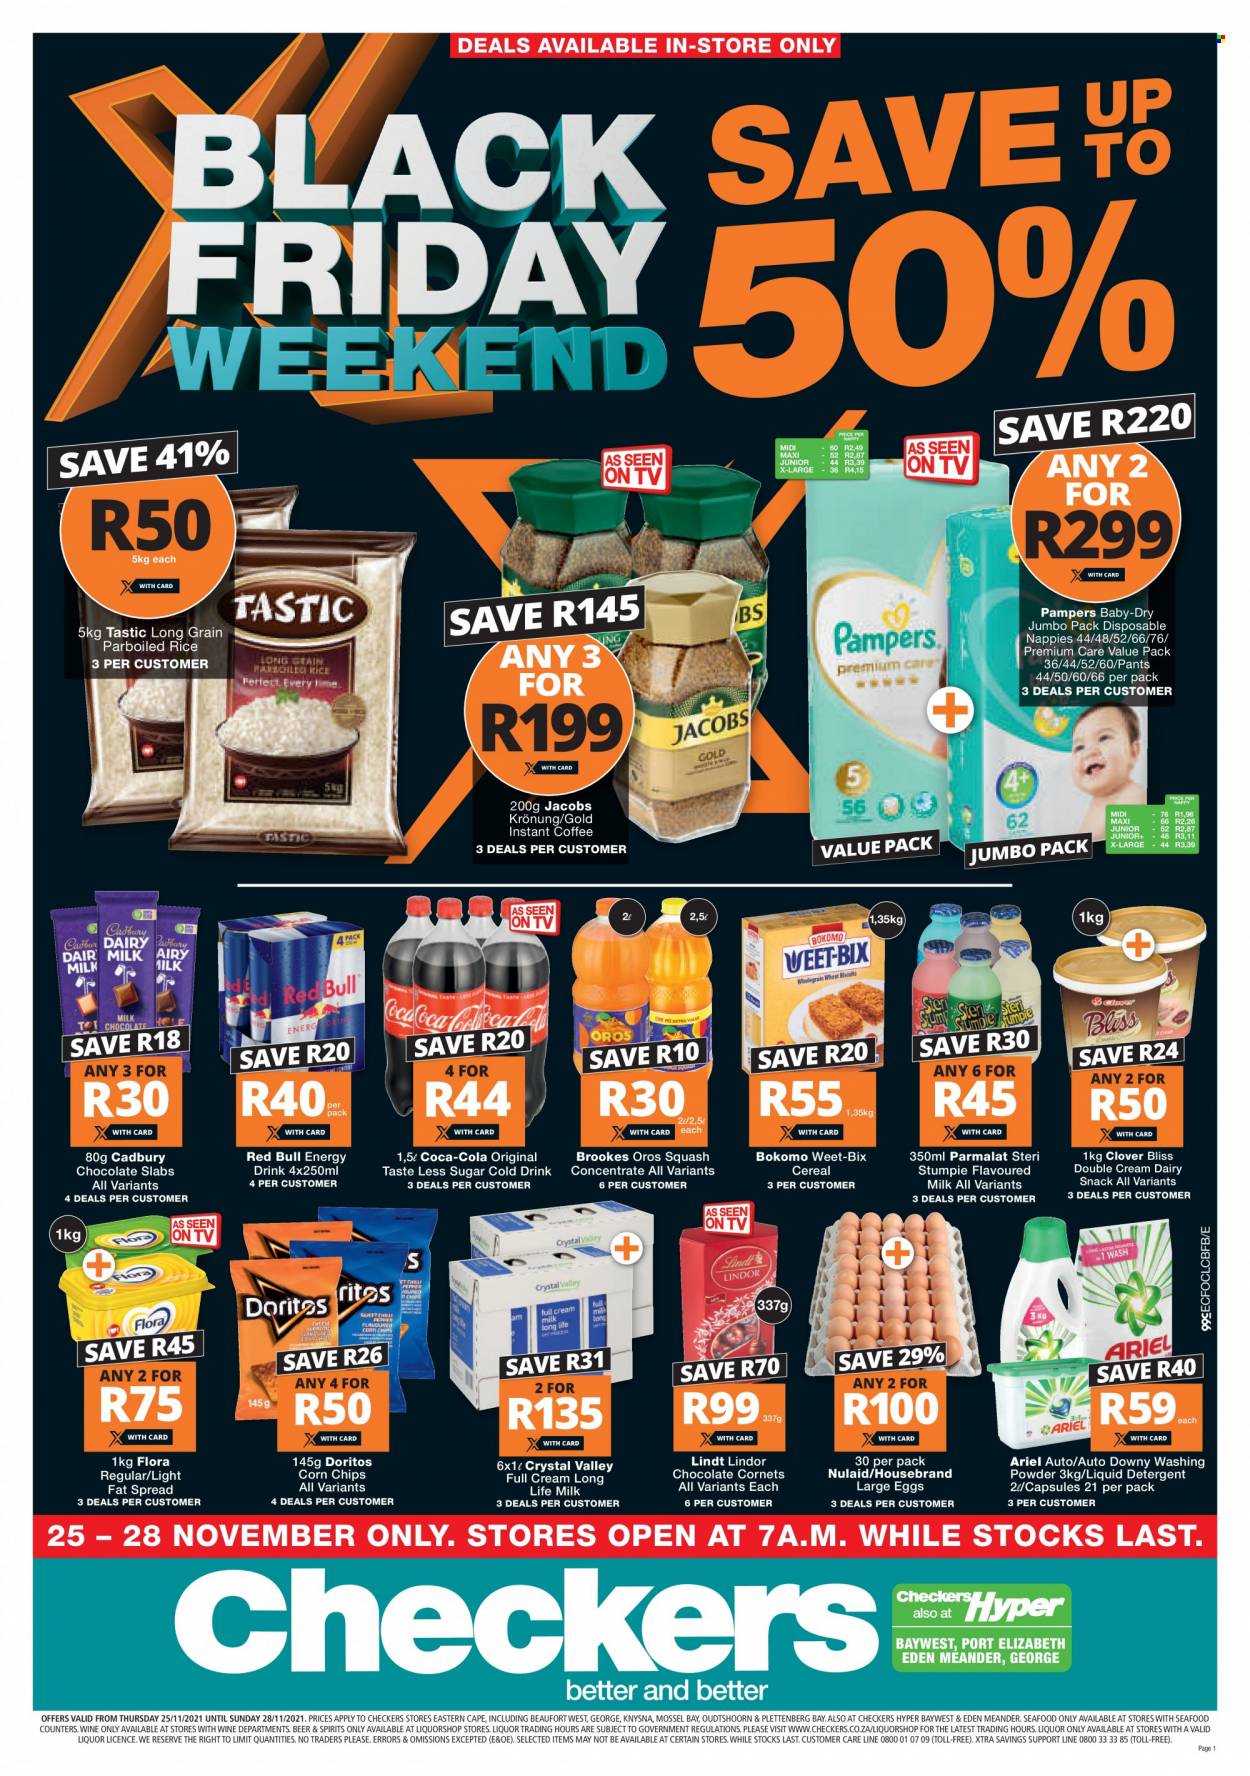 Checkers catalogue  - 25/11/2021 - 28/11/2021 - Sales products - seafood, Clover, Parmalat, milk, flavoured milk, long life milk, Steri Stumpie, large eggs, fat spread, Flora, chocolate, snack, Lindt, Lindor, chocolate slabs, Cadbury, Doritos, chips, corn chips, cereals, Weet-Bix, rice, parboiled rice, Tastic, Coca-Cola, energy drink, Oros, Red Bull, instant coffee, Jacobs, Jacobs Krönung, wine, liquor, beer, Pampers, pants, nappies, detergent, Ariel, liquid detergent, laundry powder. Page 1.